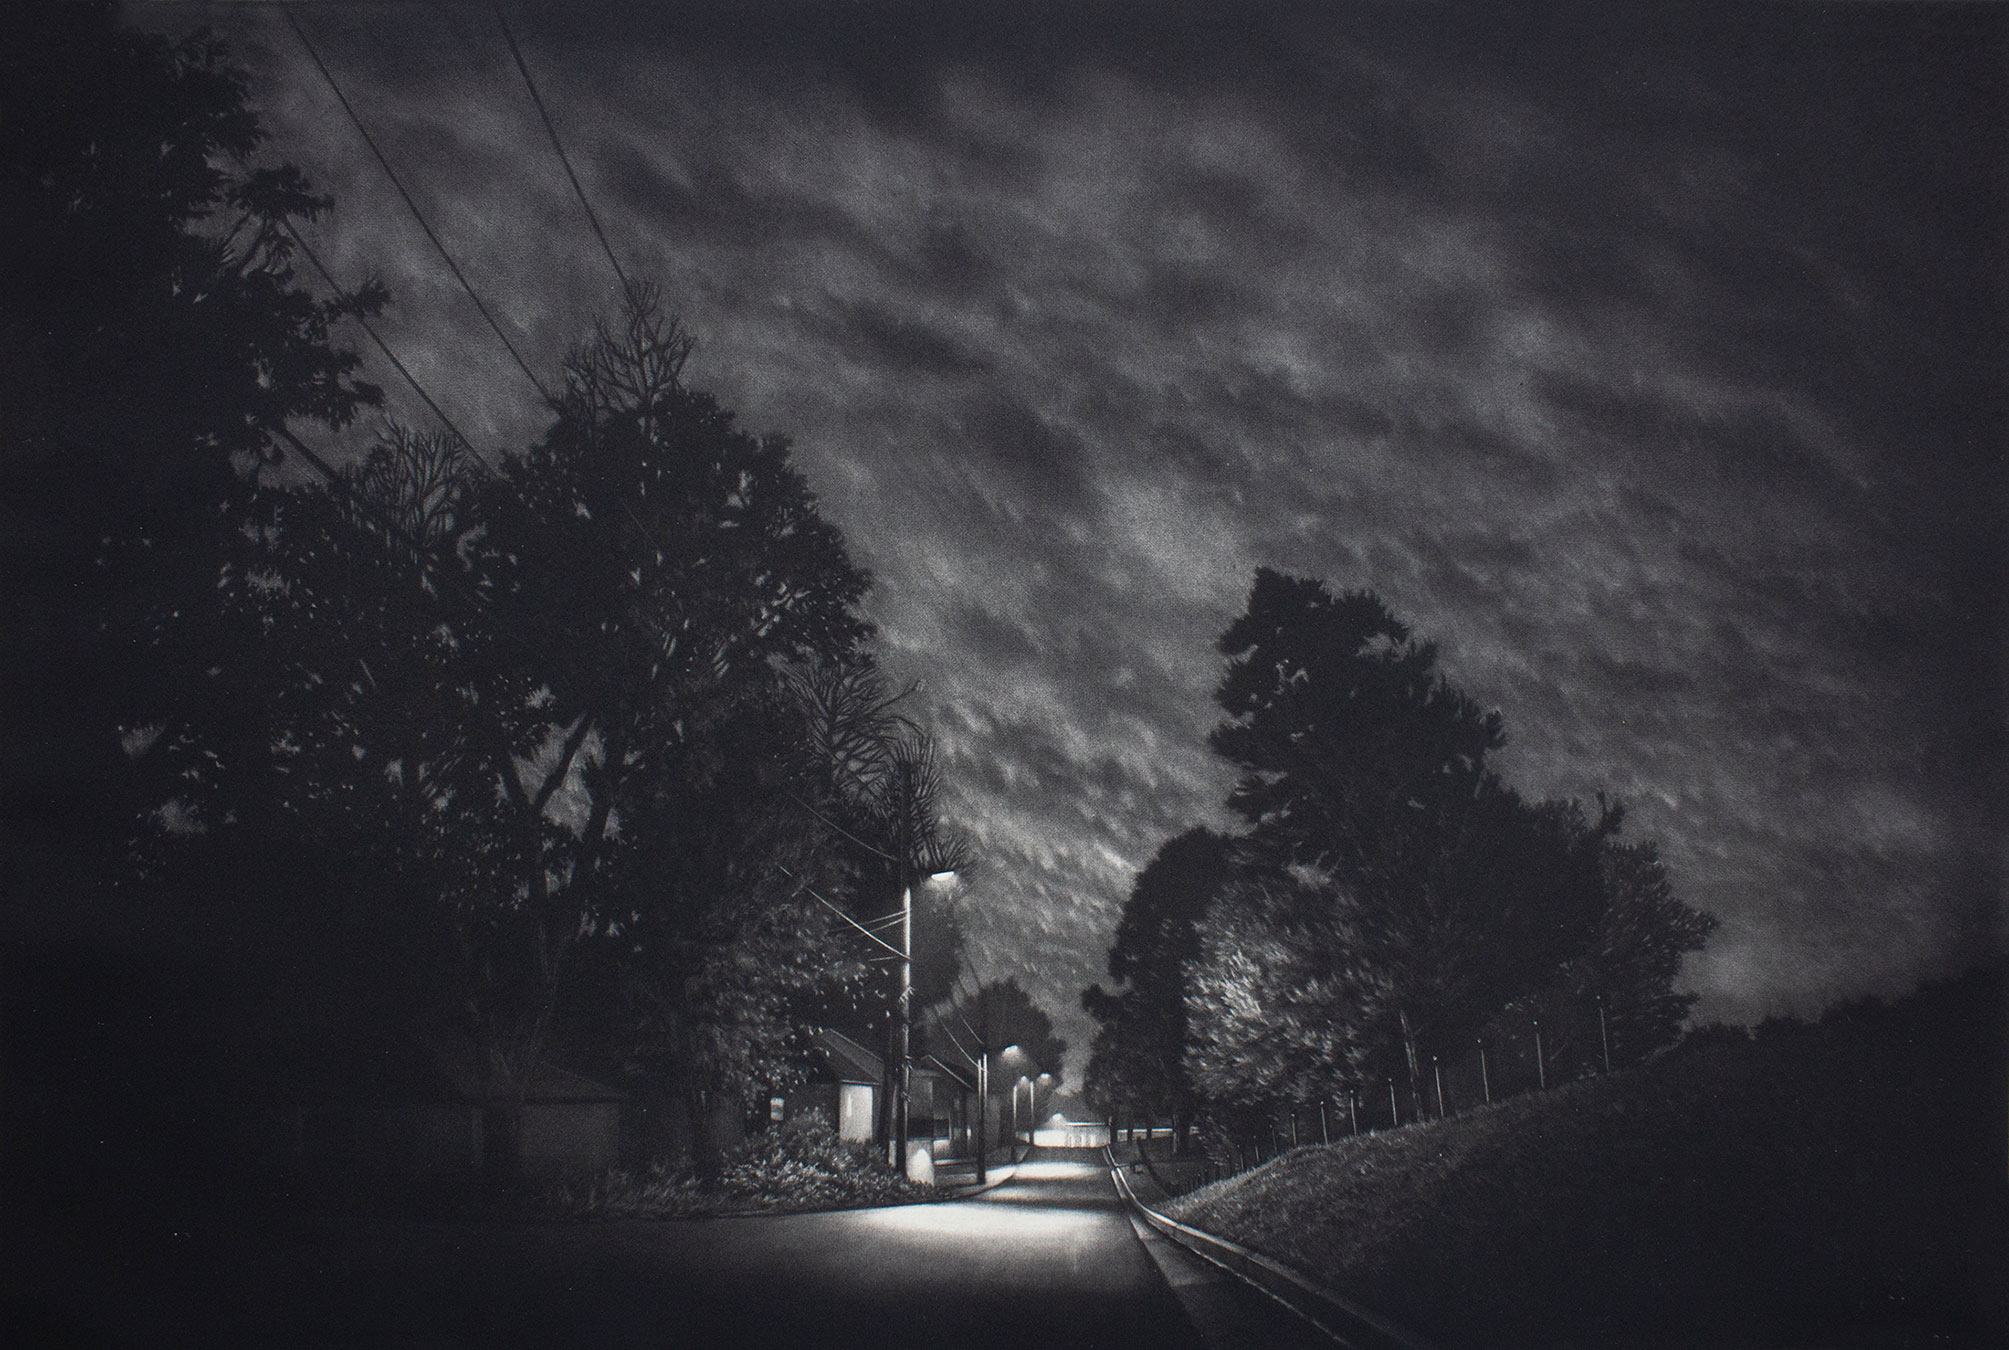 “Drift,” a 12-by-18 mezzotint by MSU Assistant Professor of Art Jacob Crook, street surrounded by trees at night shows 